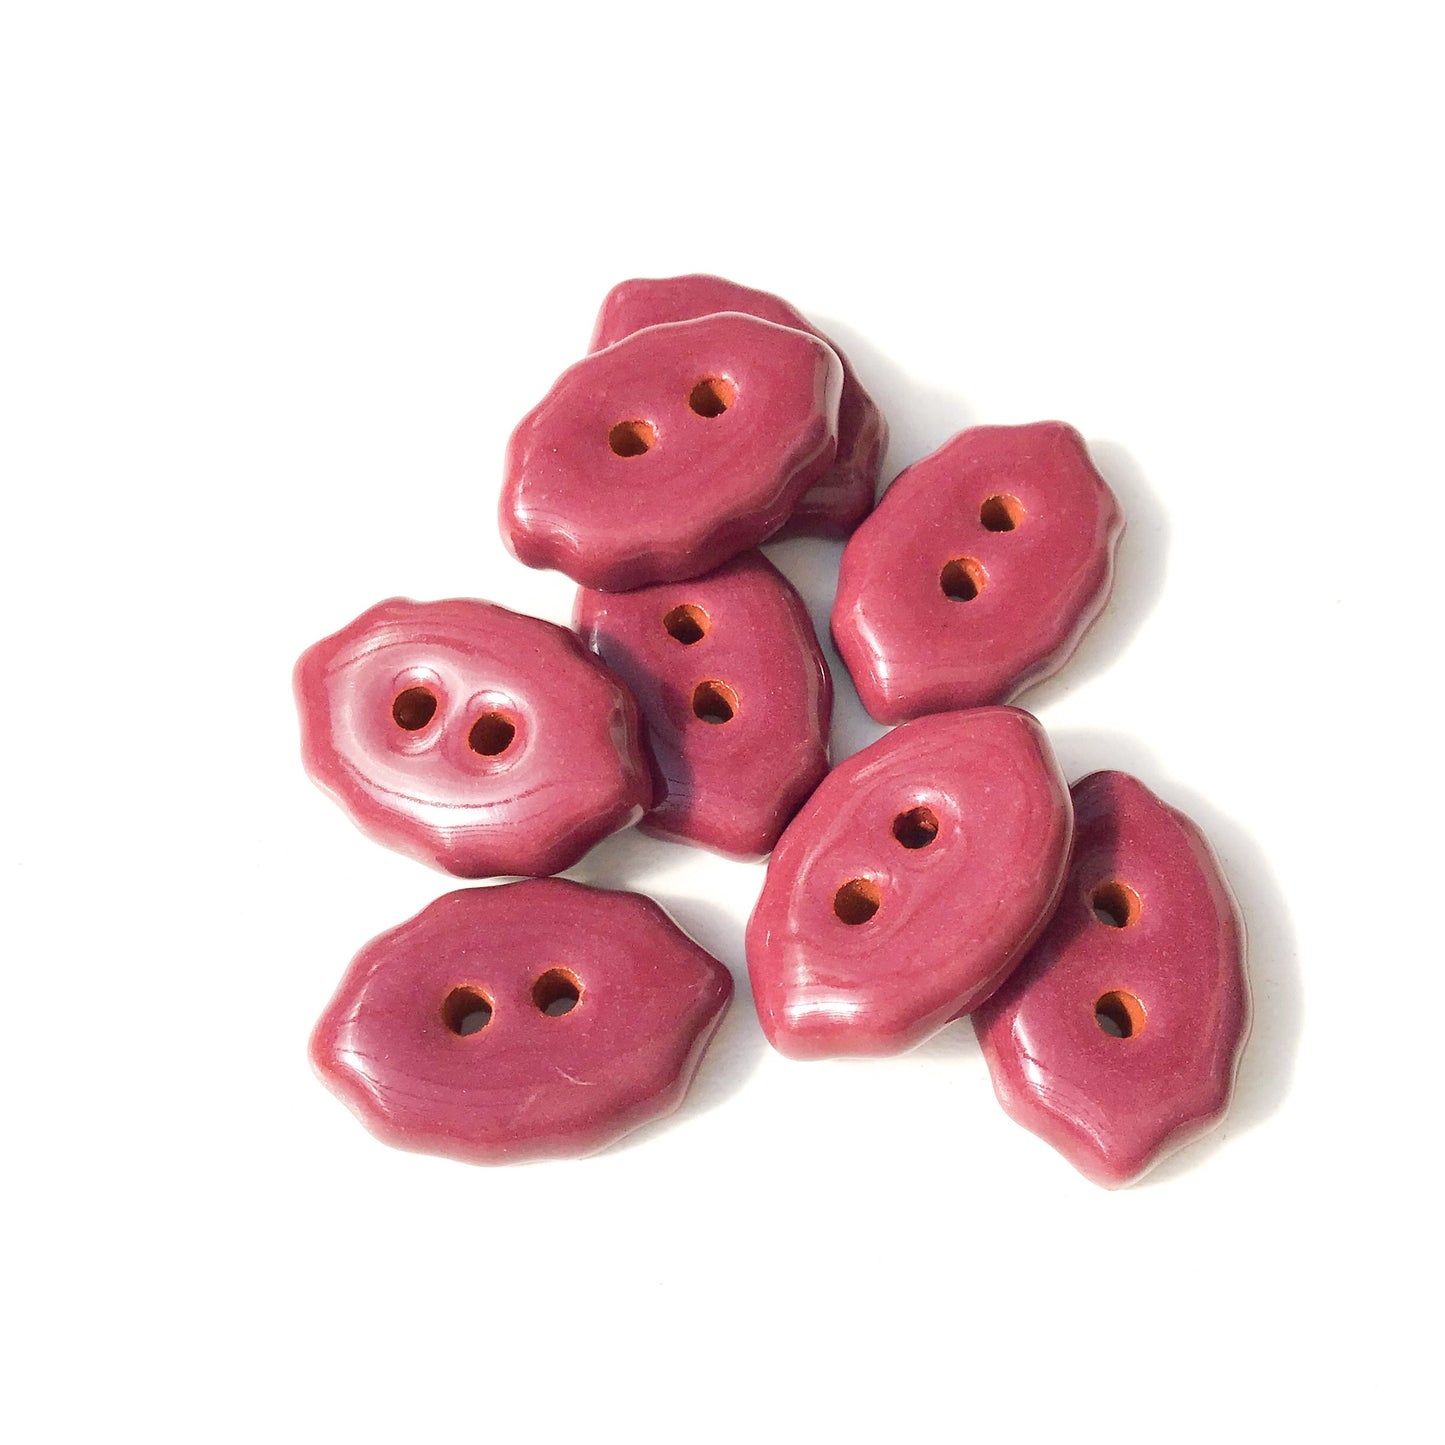 Burgundy Oval Clay Buttons - Wine Colored Clay Buttons - 1/2" x 3/4" - 8 Pack